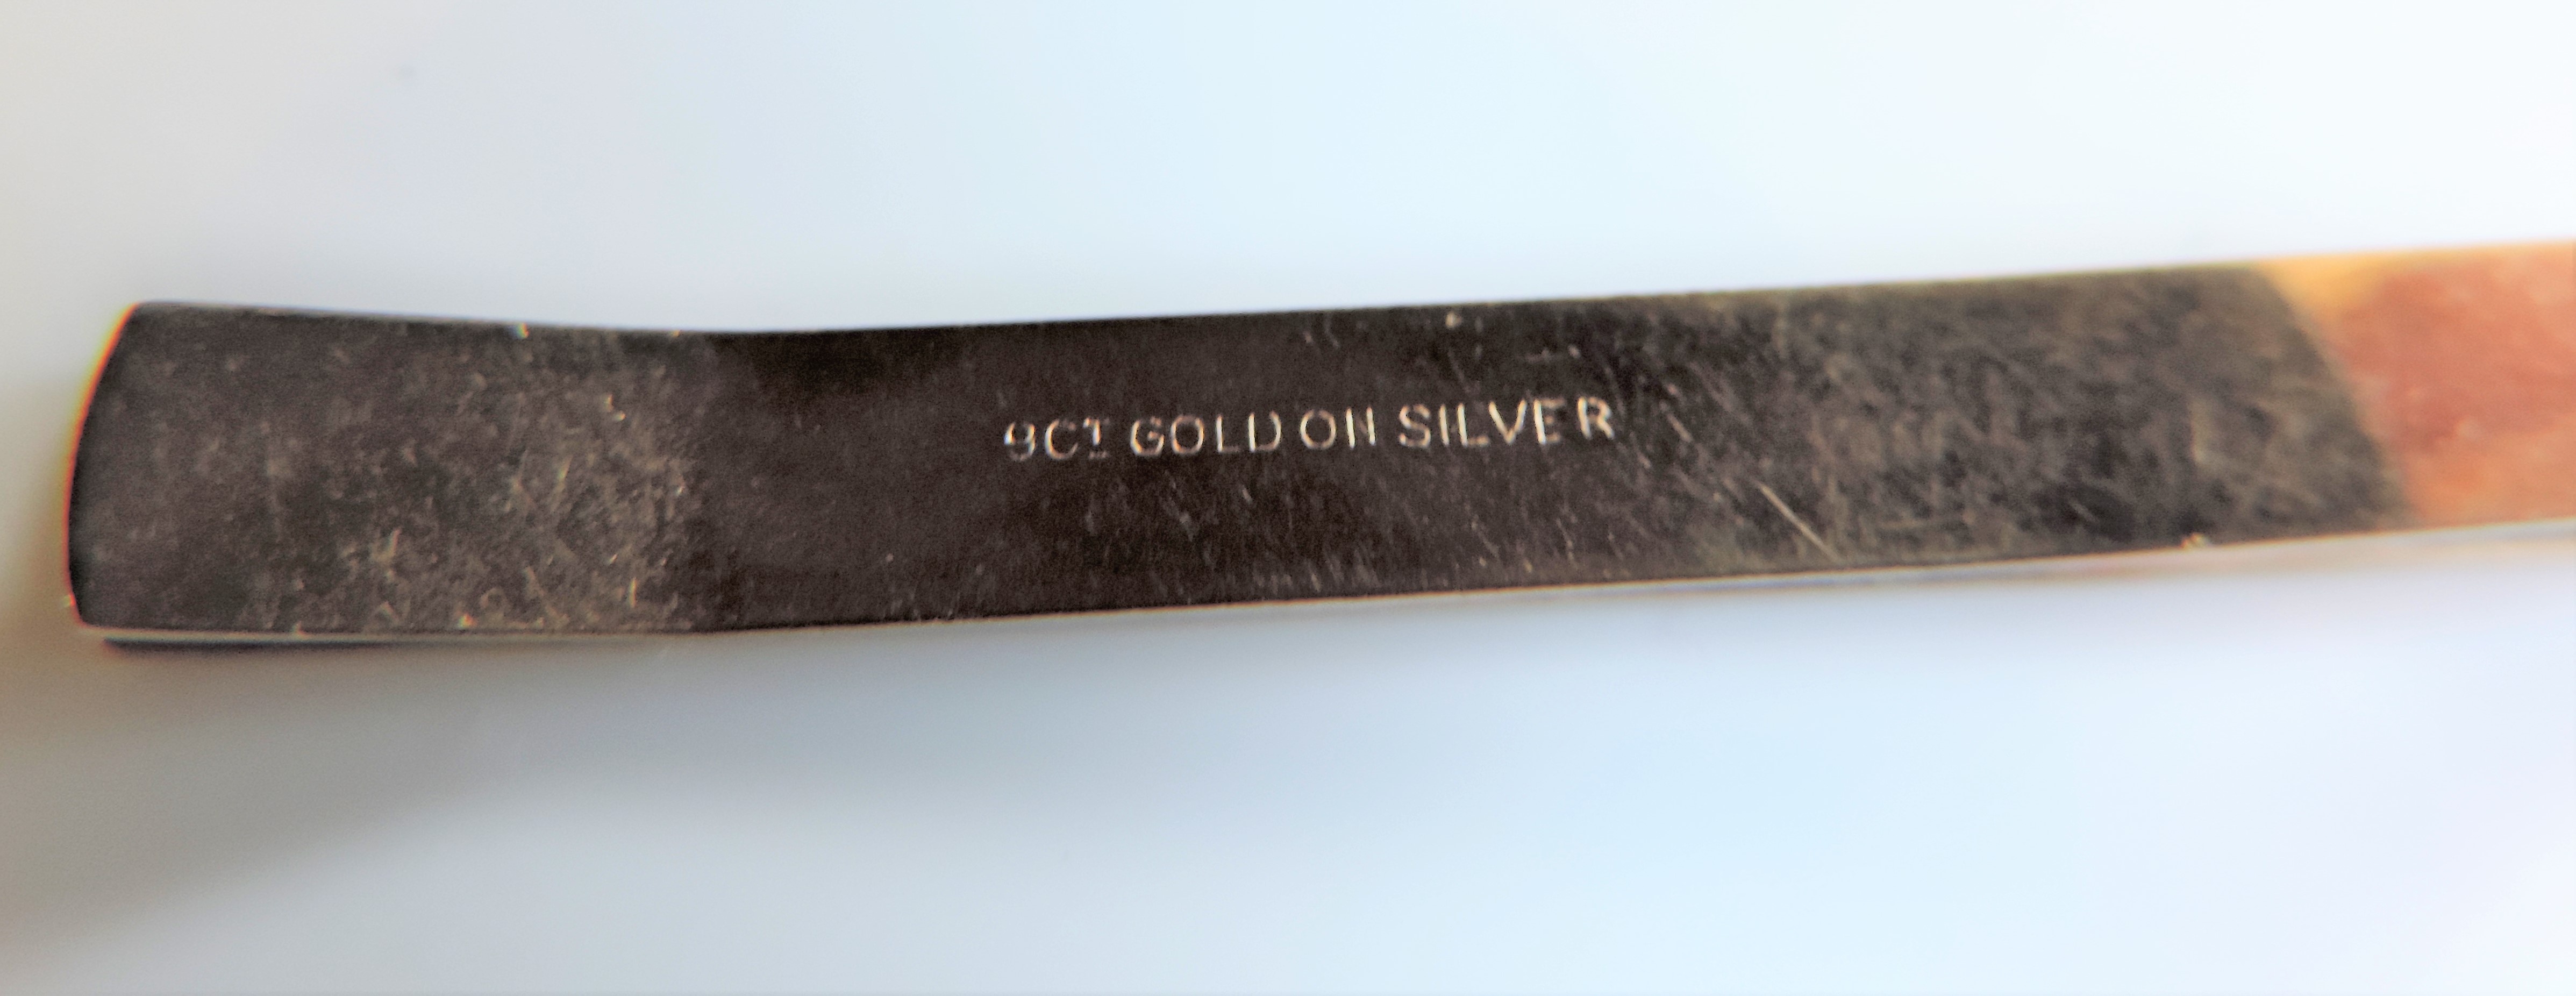 Vintage Gold on Sterling Silver Tie Clip - Image 3 of 4